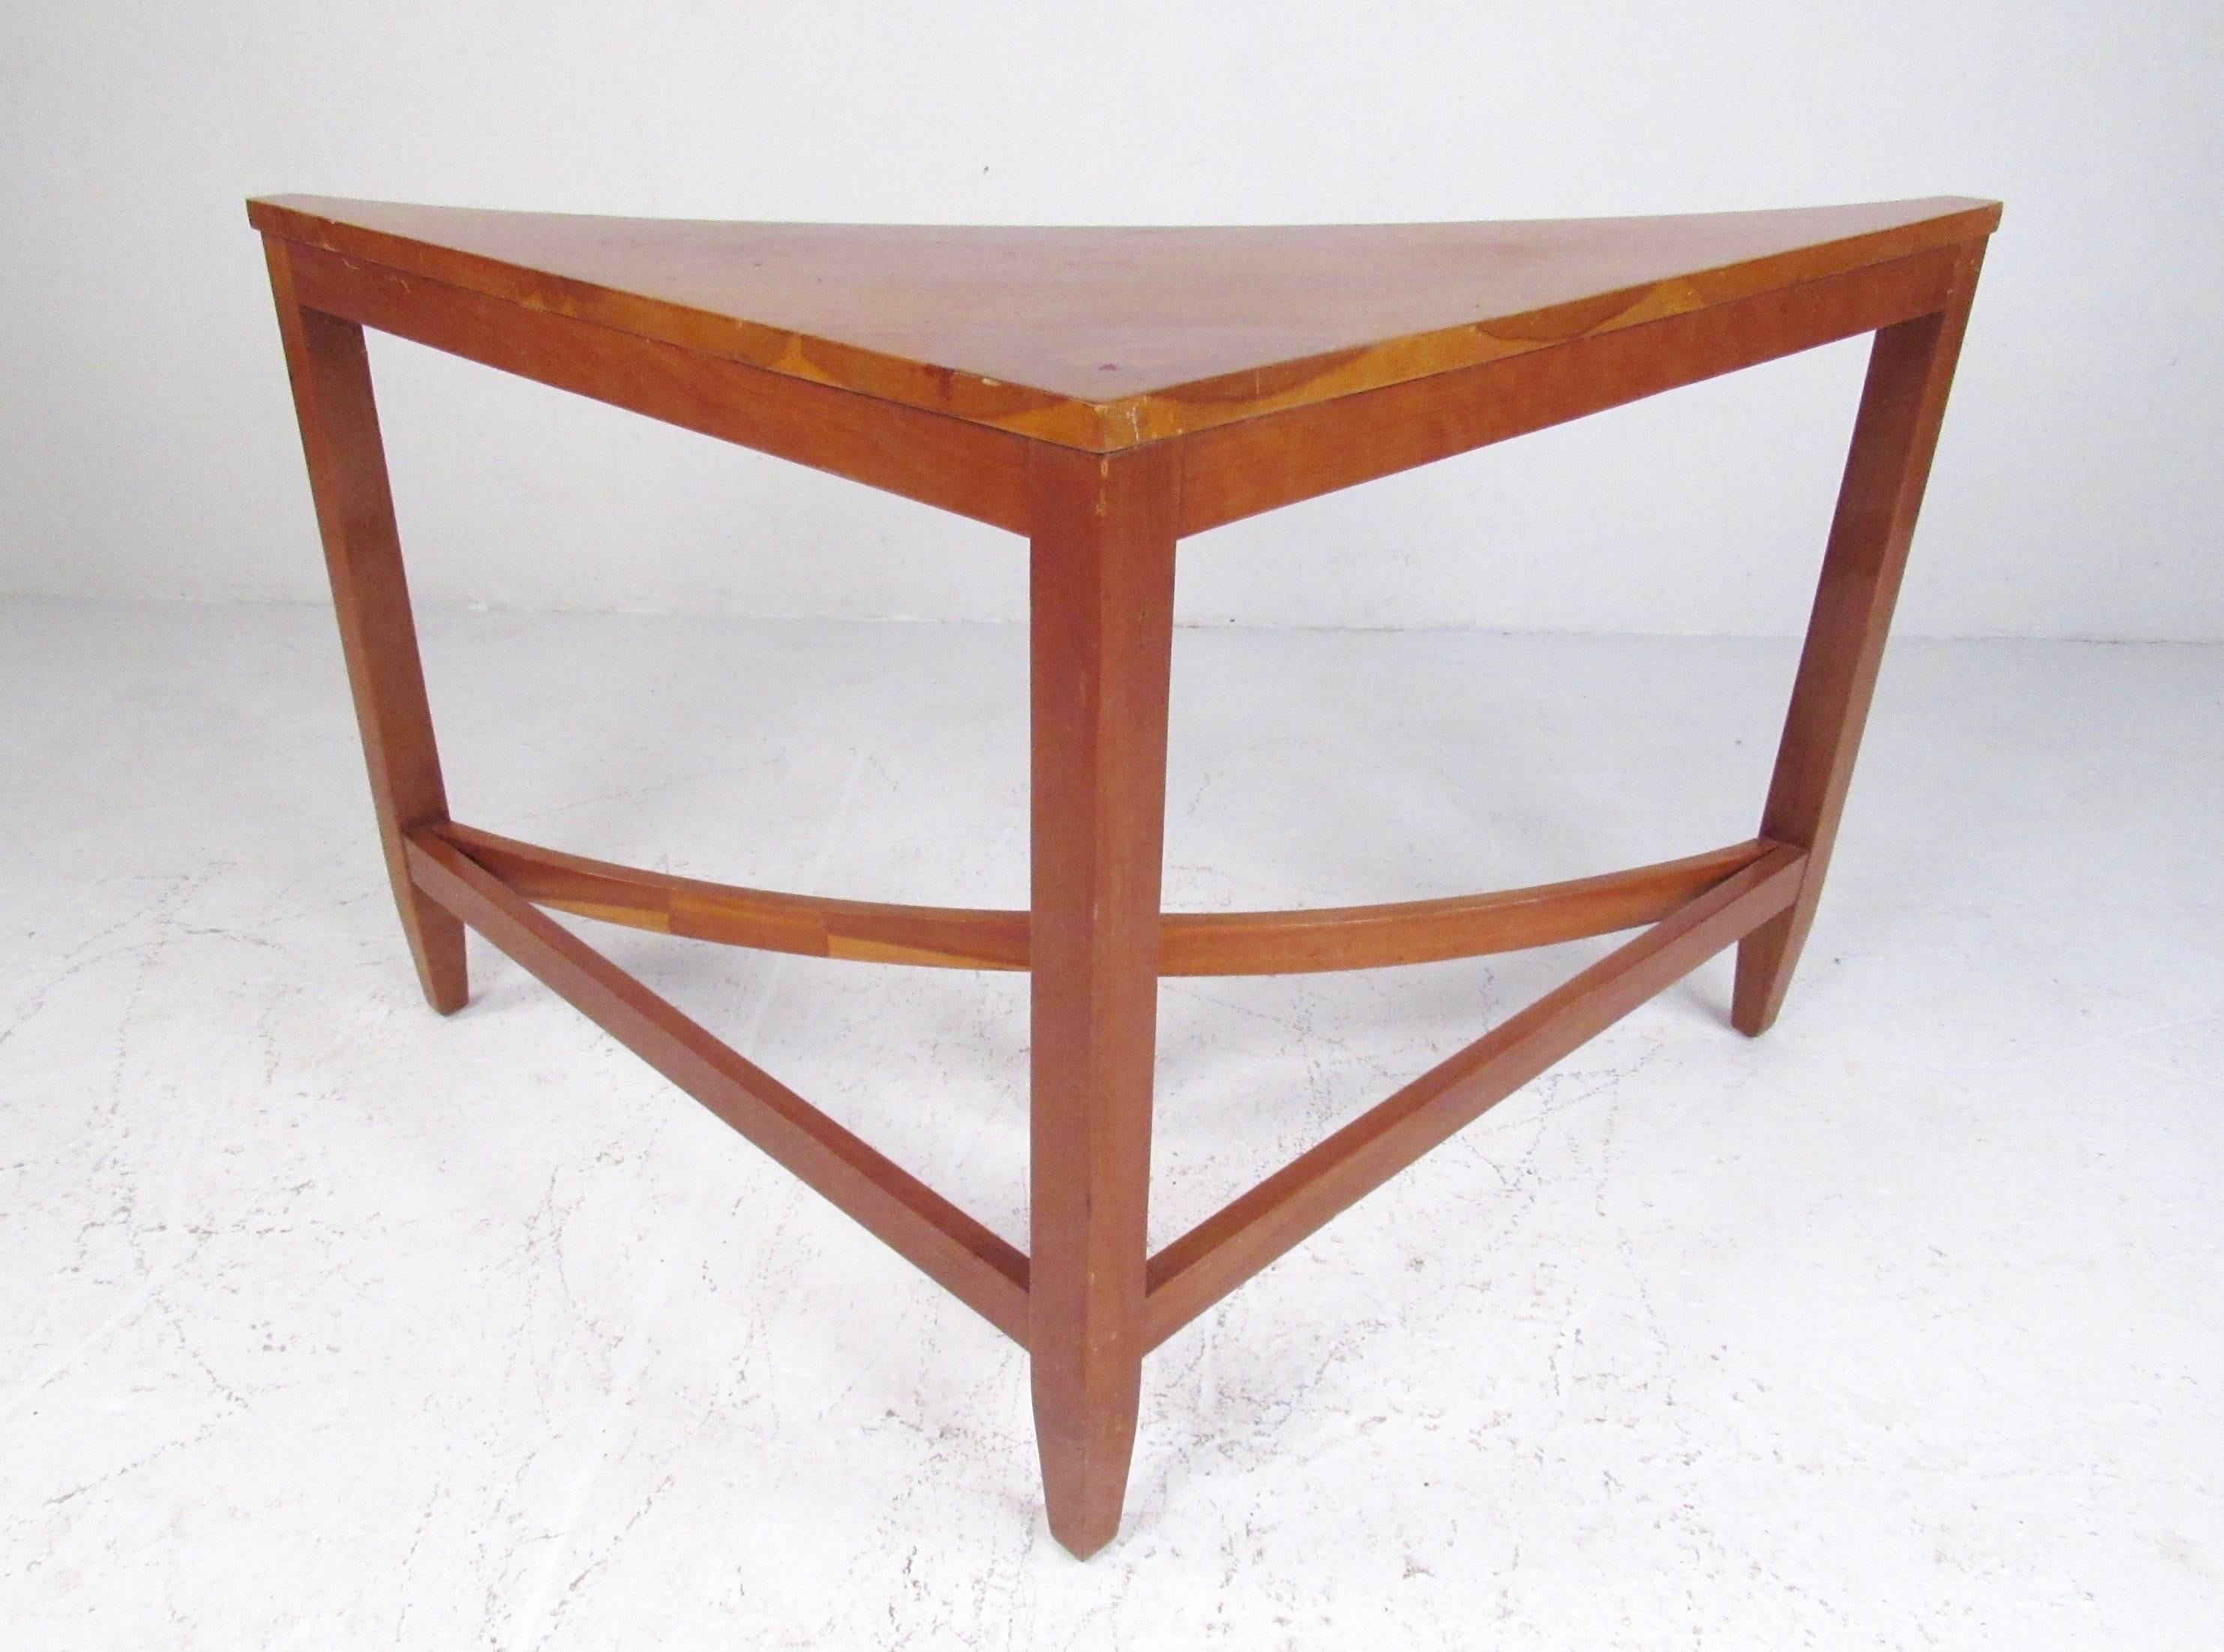 This stylish vintage corner table features triangular design with bentwood stretchers and natural wood finish. Unique table makes the perfect addition to home or office seating area. Please confirm item location (NY or NJ). 